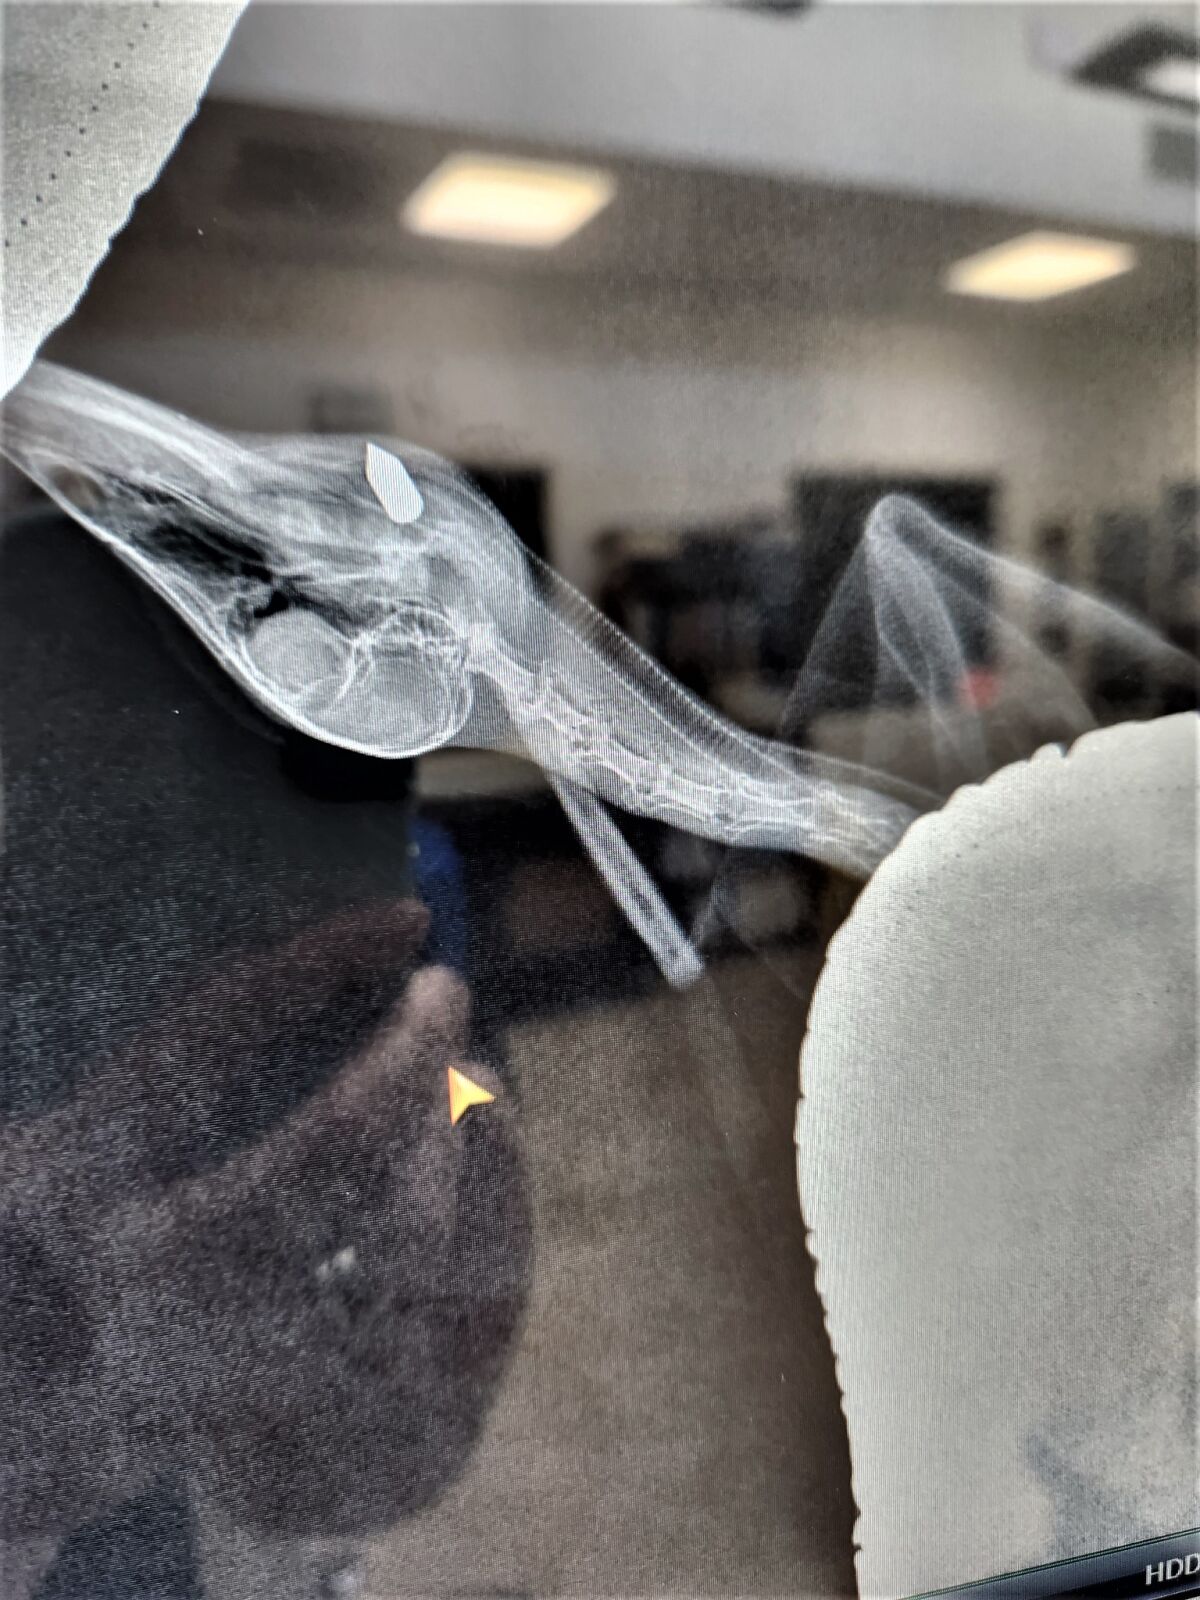 An X-ray shows where a small arrow, likely launched by a handheld crossbow, penetrated the neck of a mallard duck.